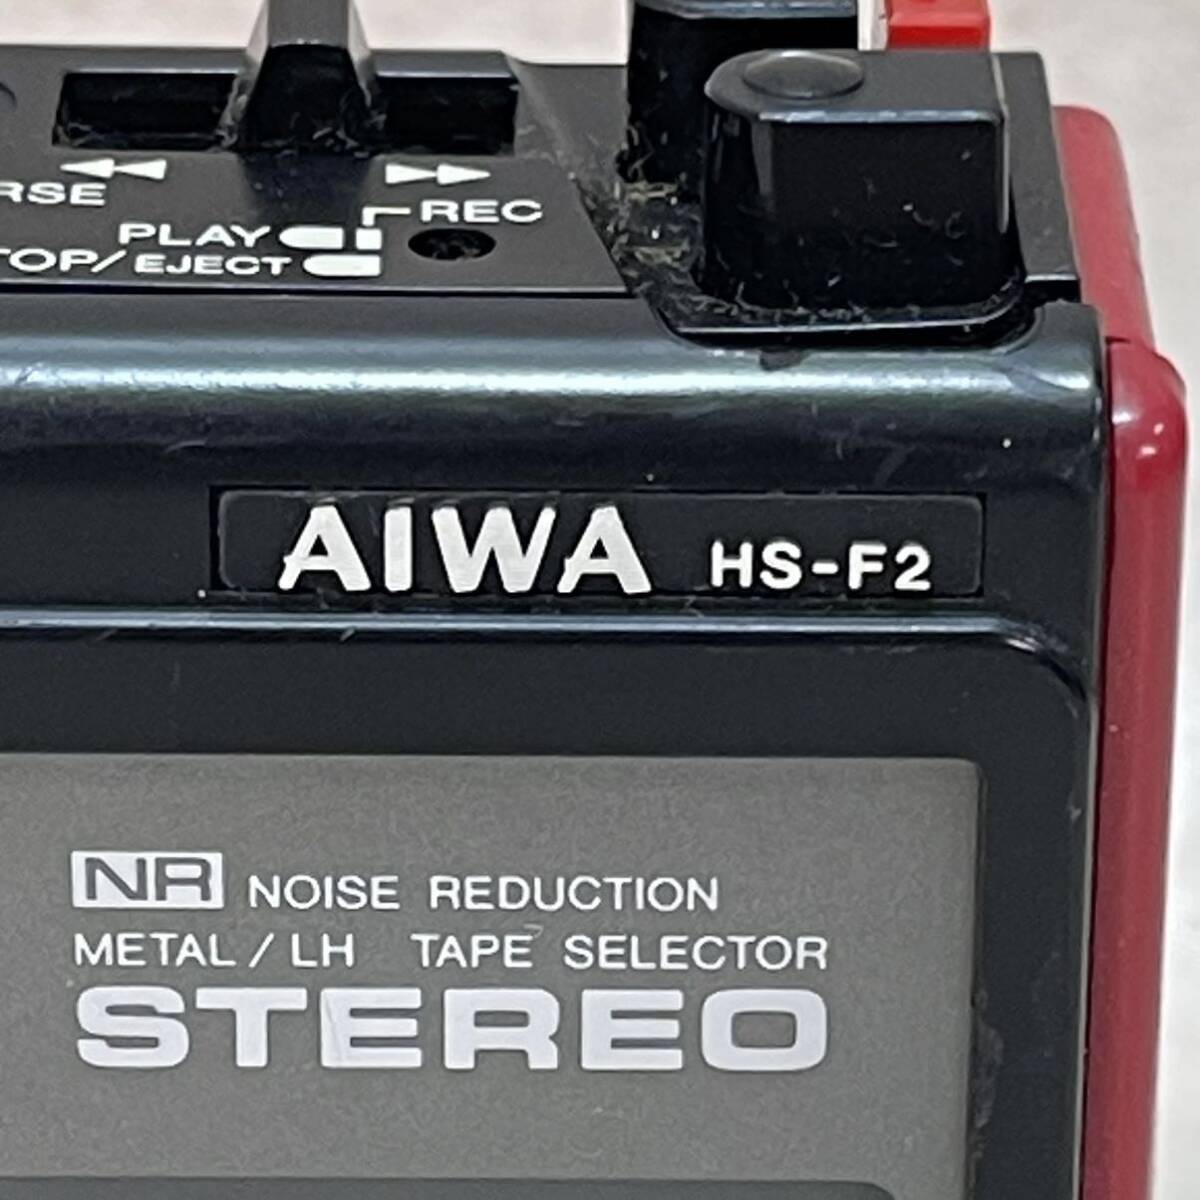 J5221* secondhand goods * electrification has confirmed * AIWA CassetteBoy Aiwa cassette Boy HS-P2 red red 